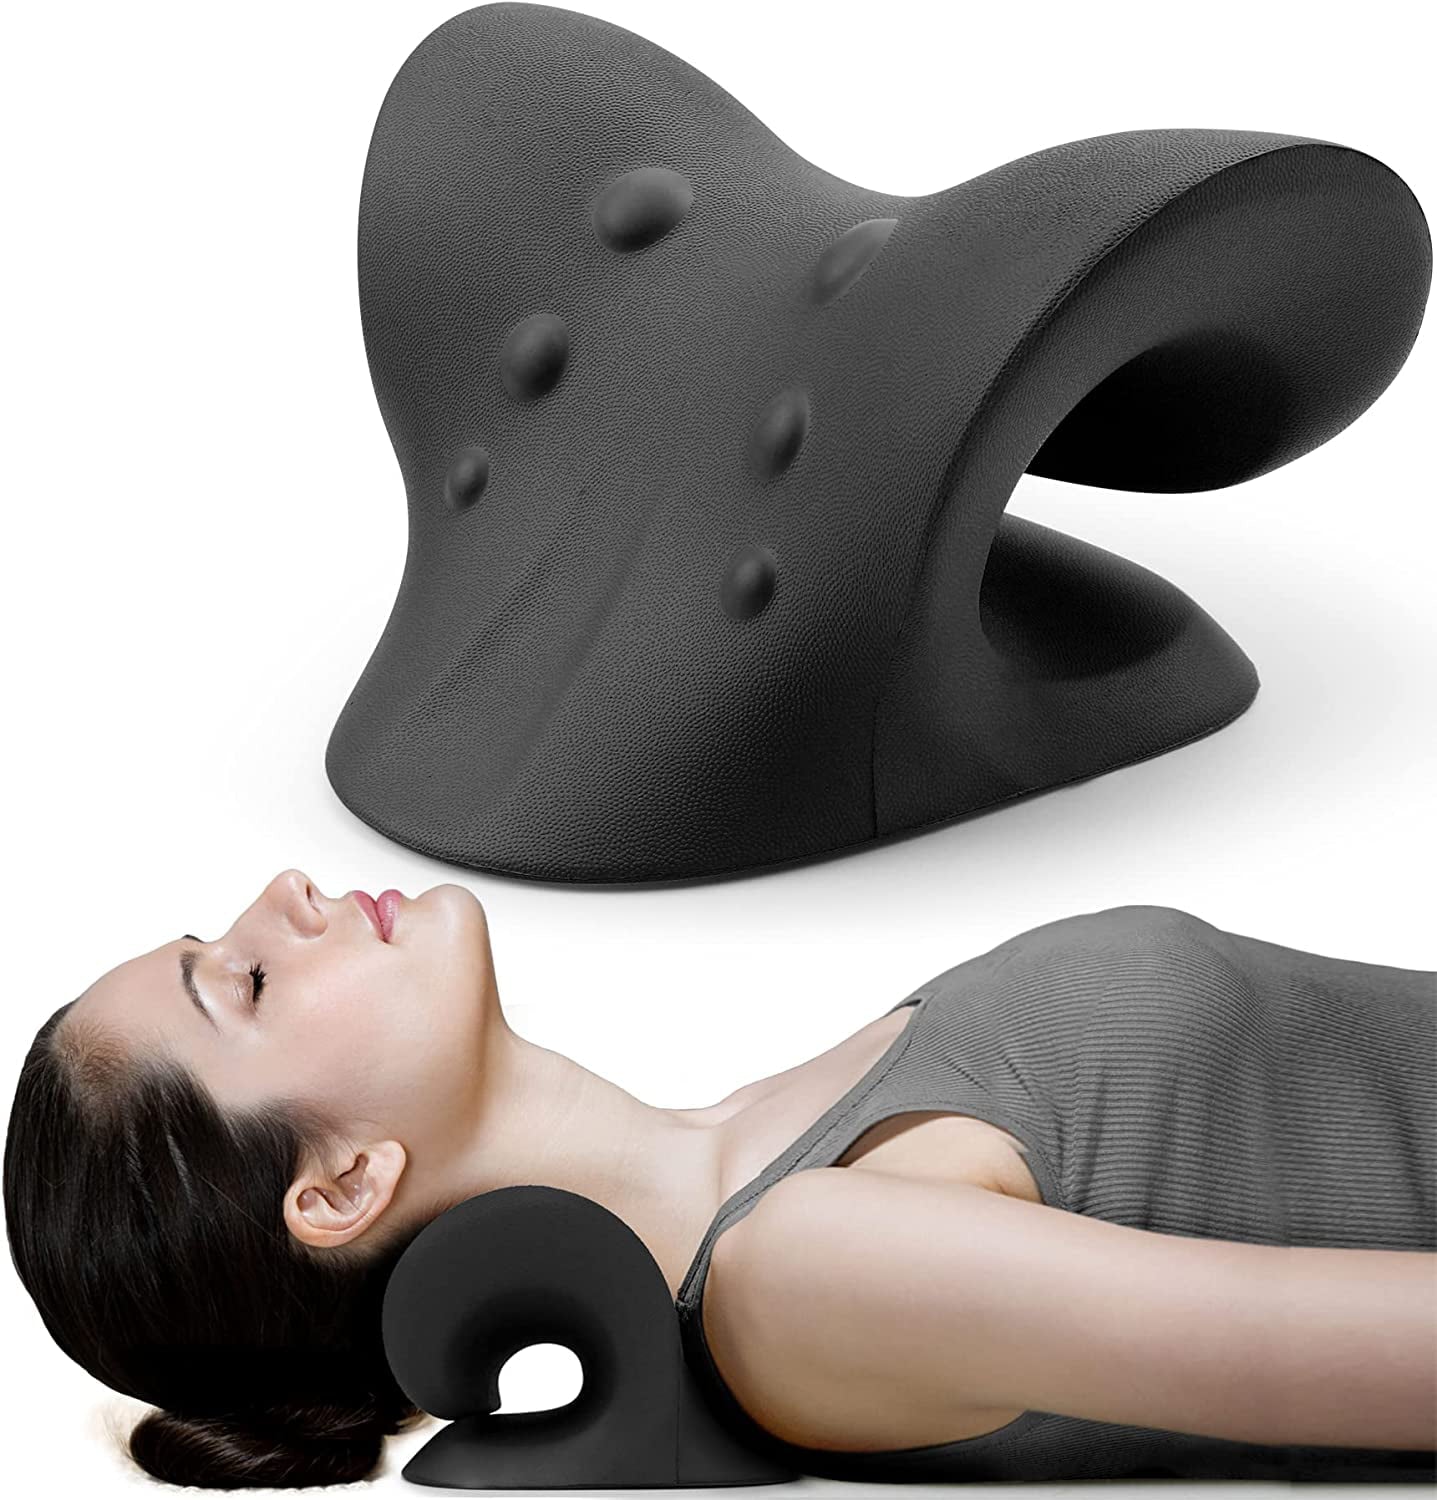 WANDF Neck and Shoulder Relaxer, Cervical Traction Device for TMJ Pain Relief and Cervical Spine Alignment, Chiropractic Pillow Neck Stretcher(BLACK)